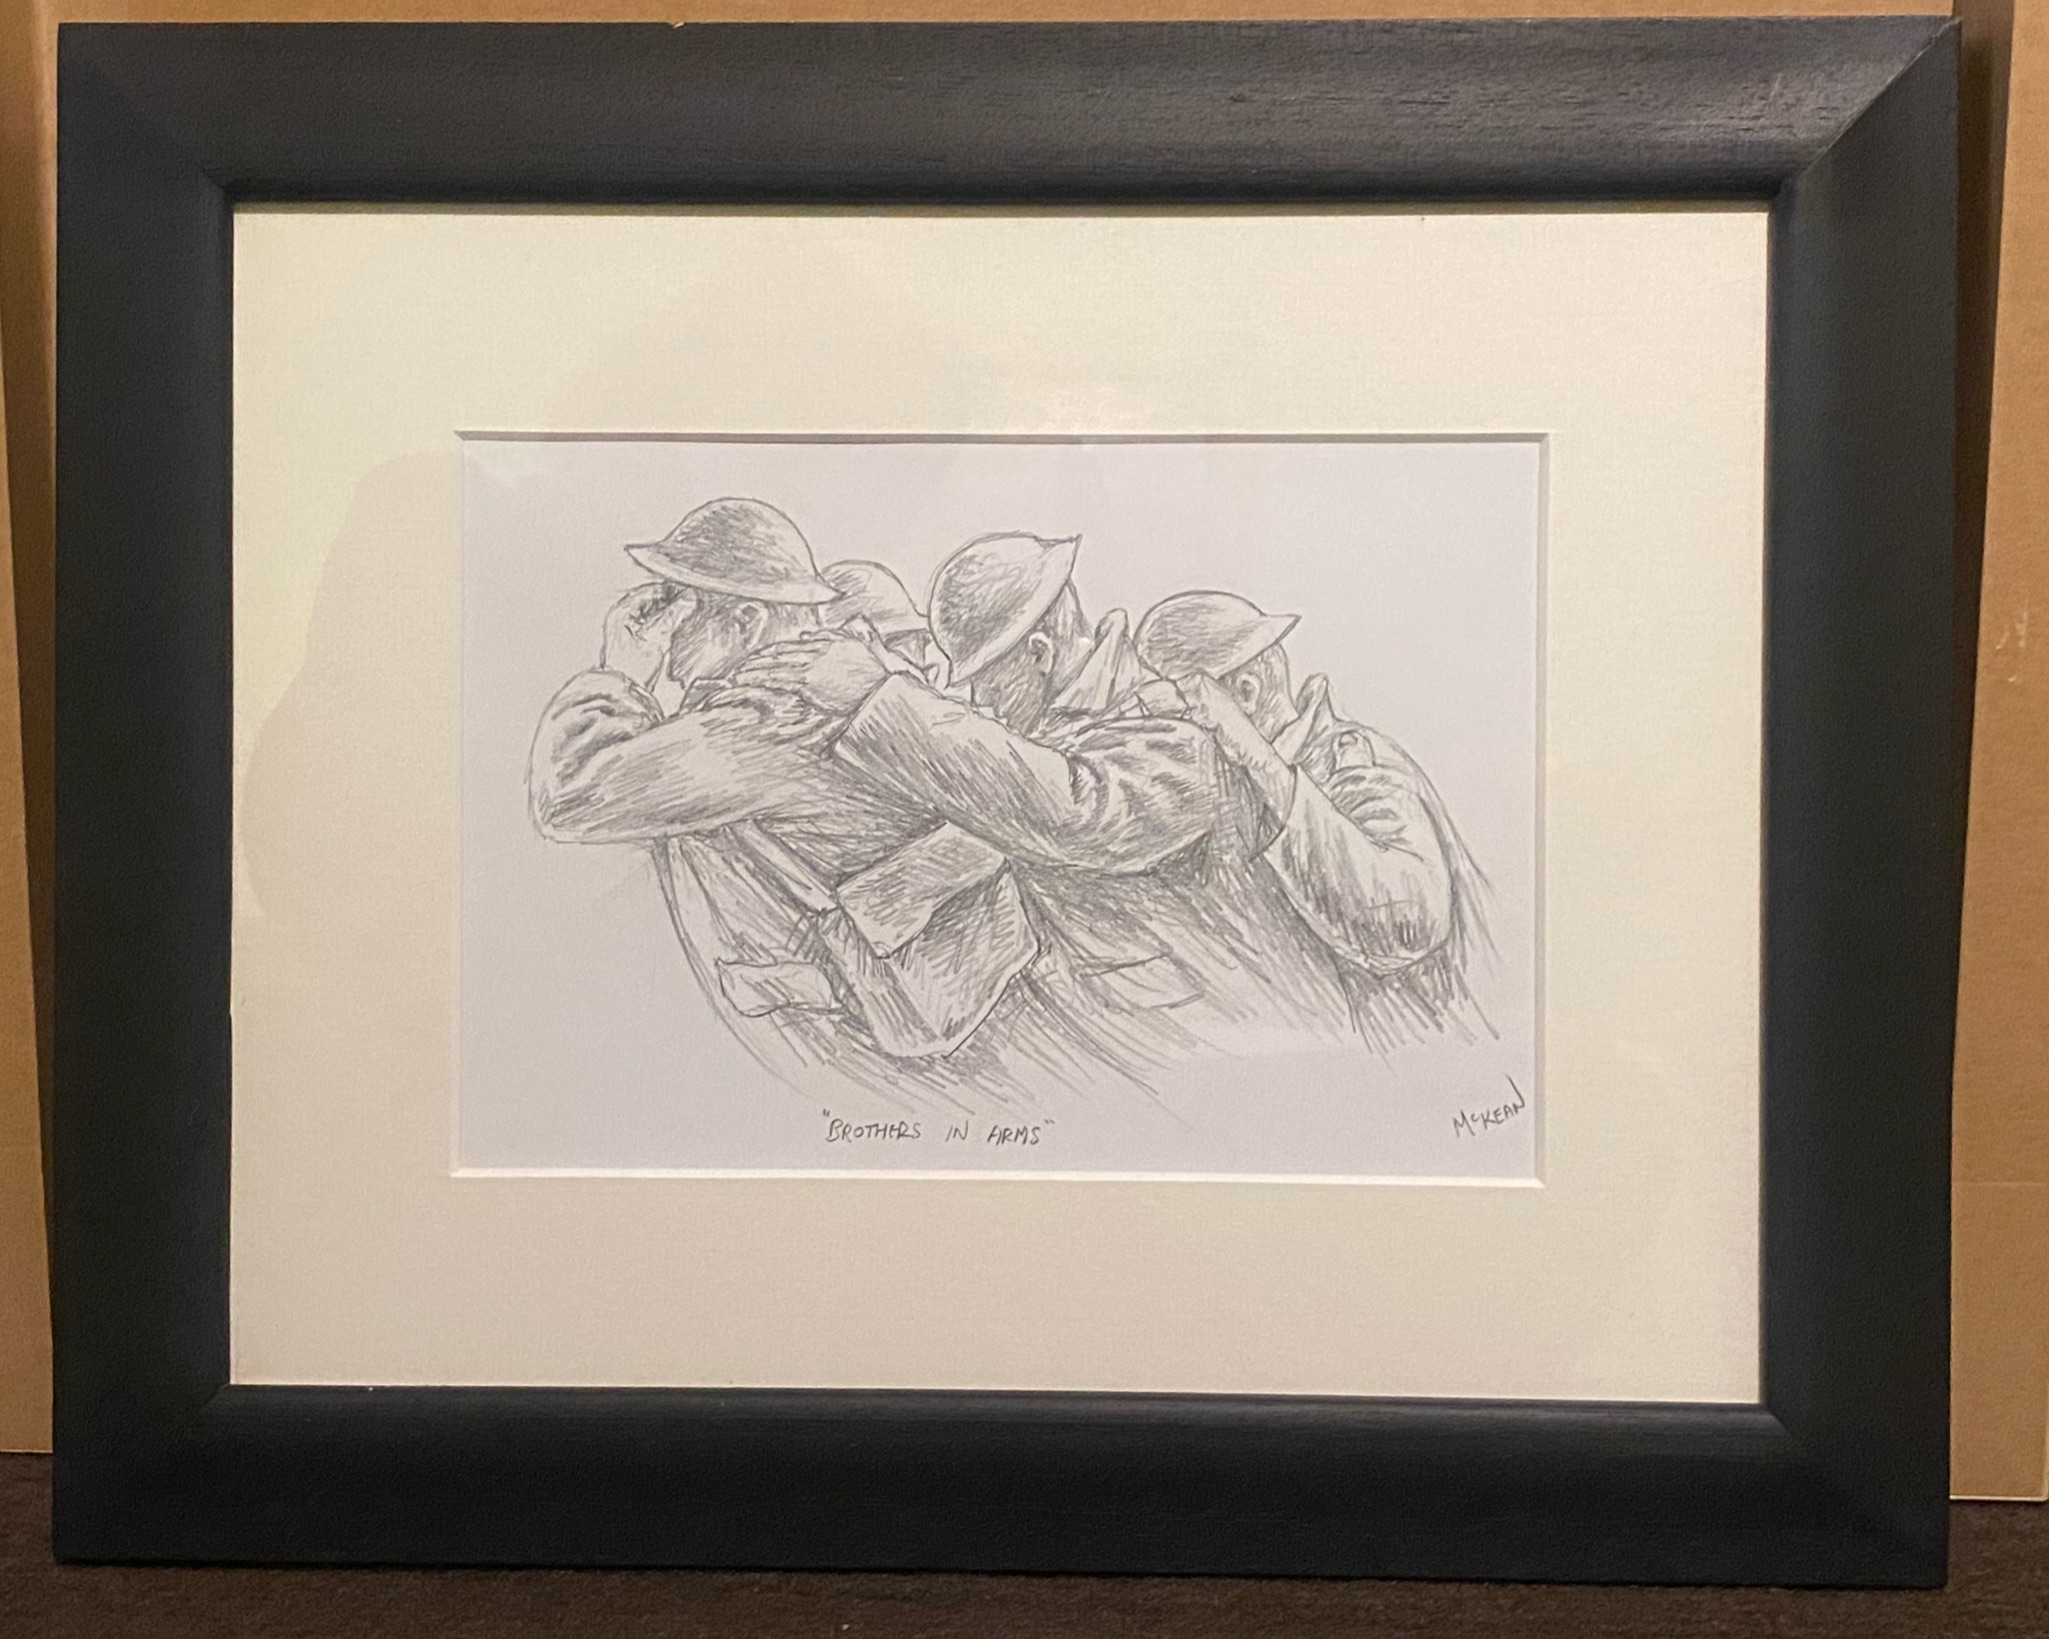 "Brothers in arms" Framed Signed Pencil drawing by Graham McKean - Image 2 of 5